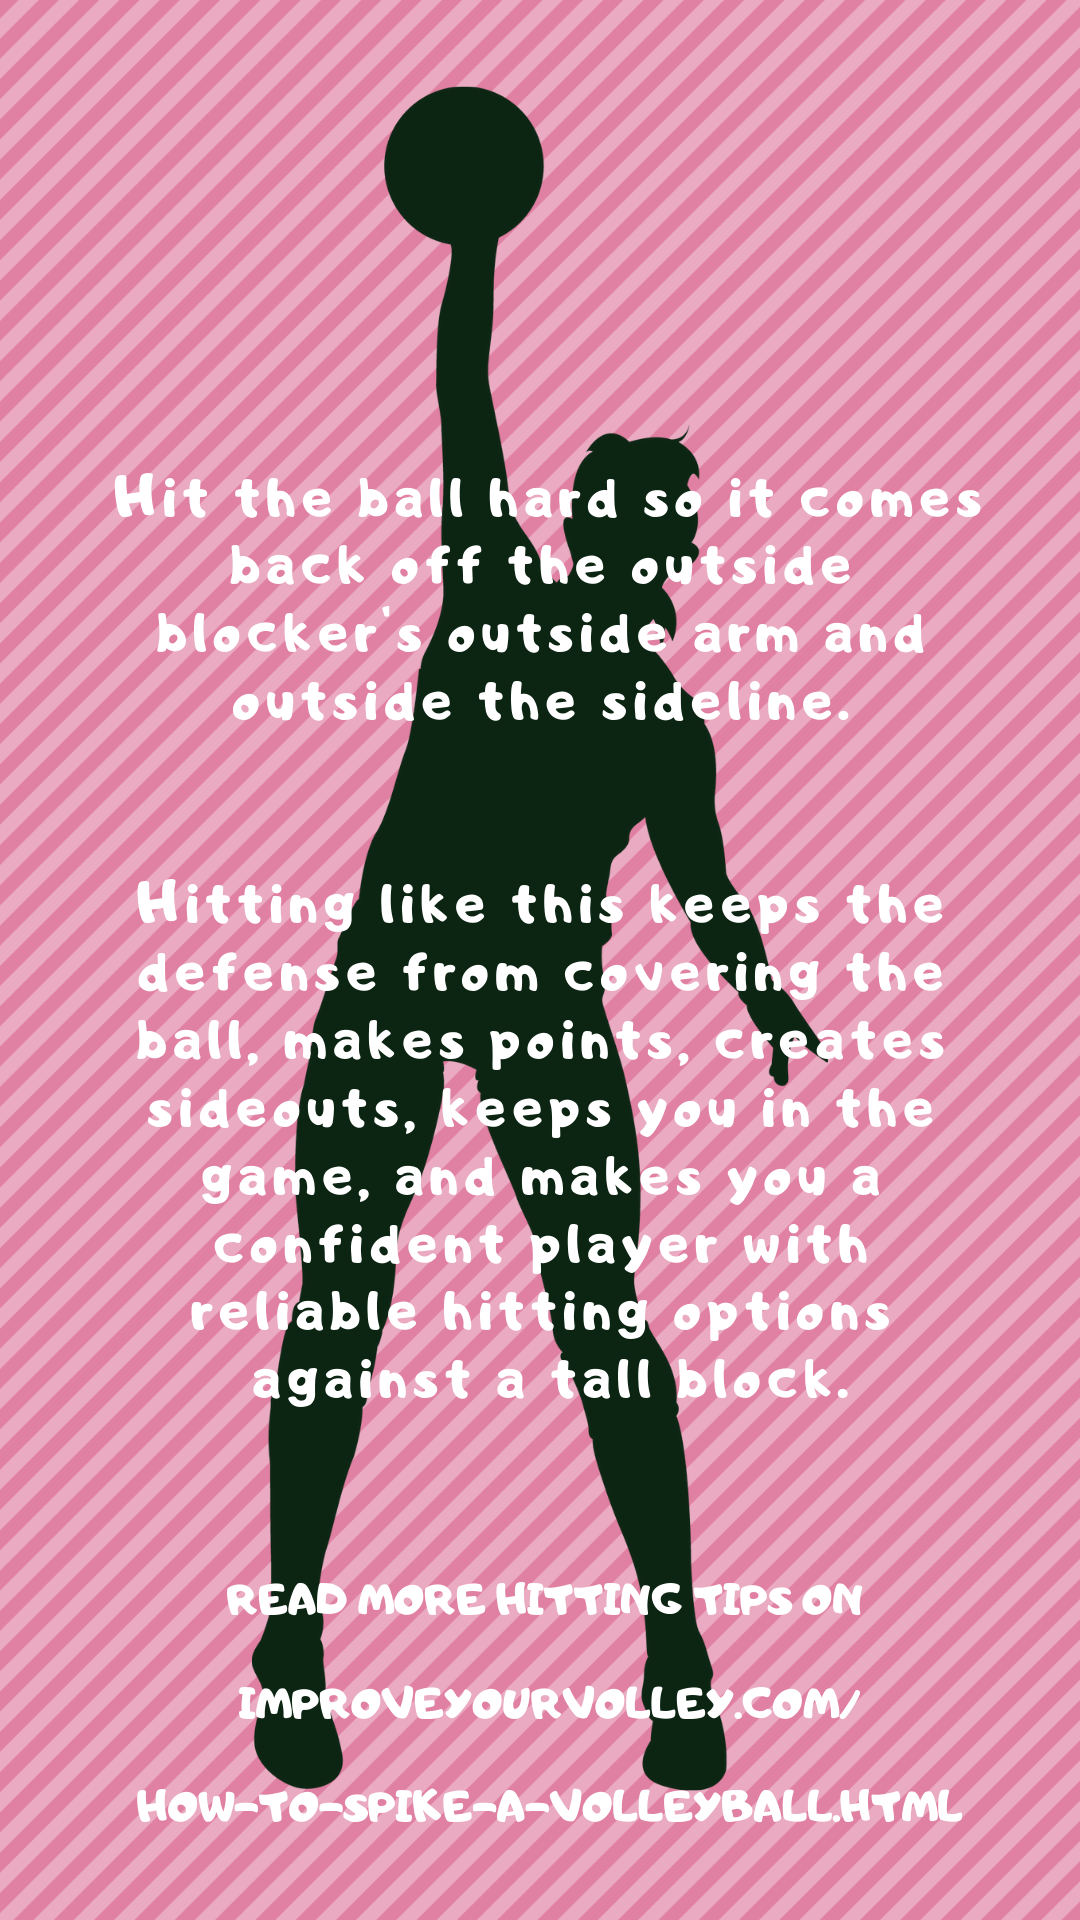 Hit the ball hard so it comes off the block, over your shoulder and out of bounds.   Read more hitting tips at www.improveyourvolley.com/how-to-spike-a-volleyball.html